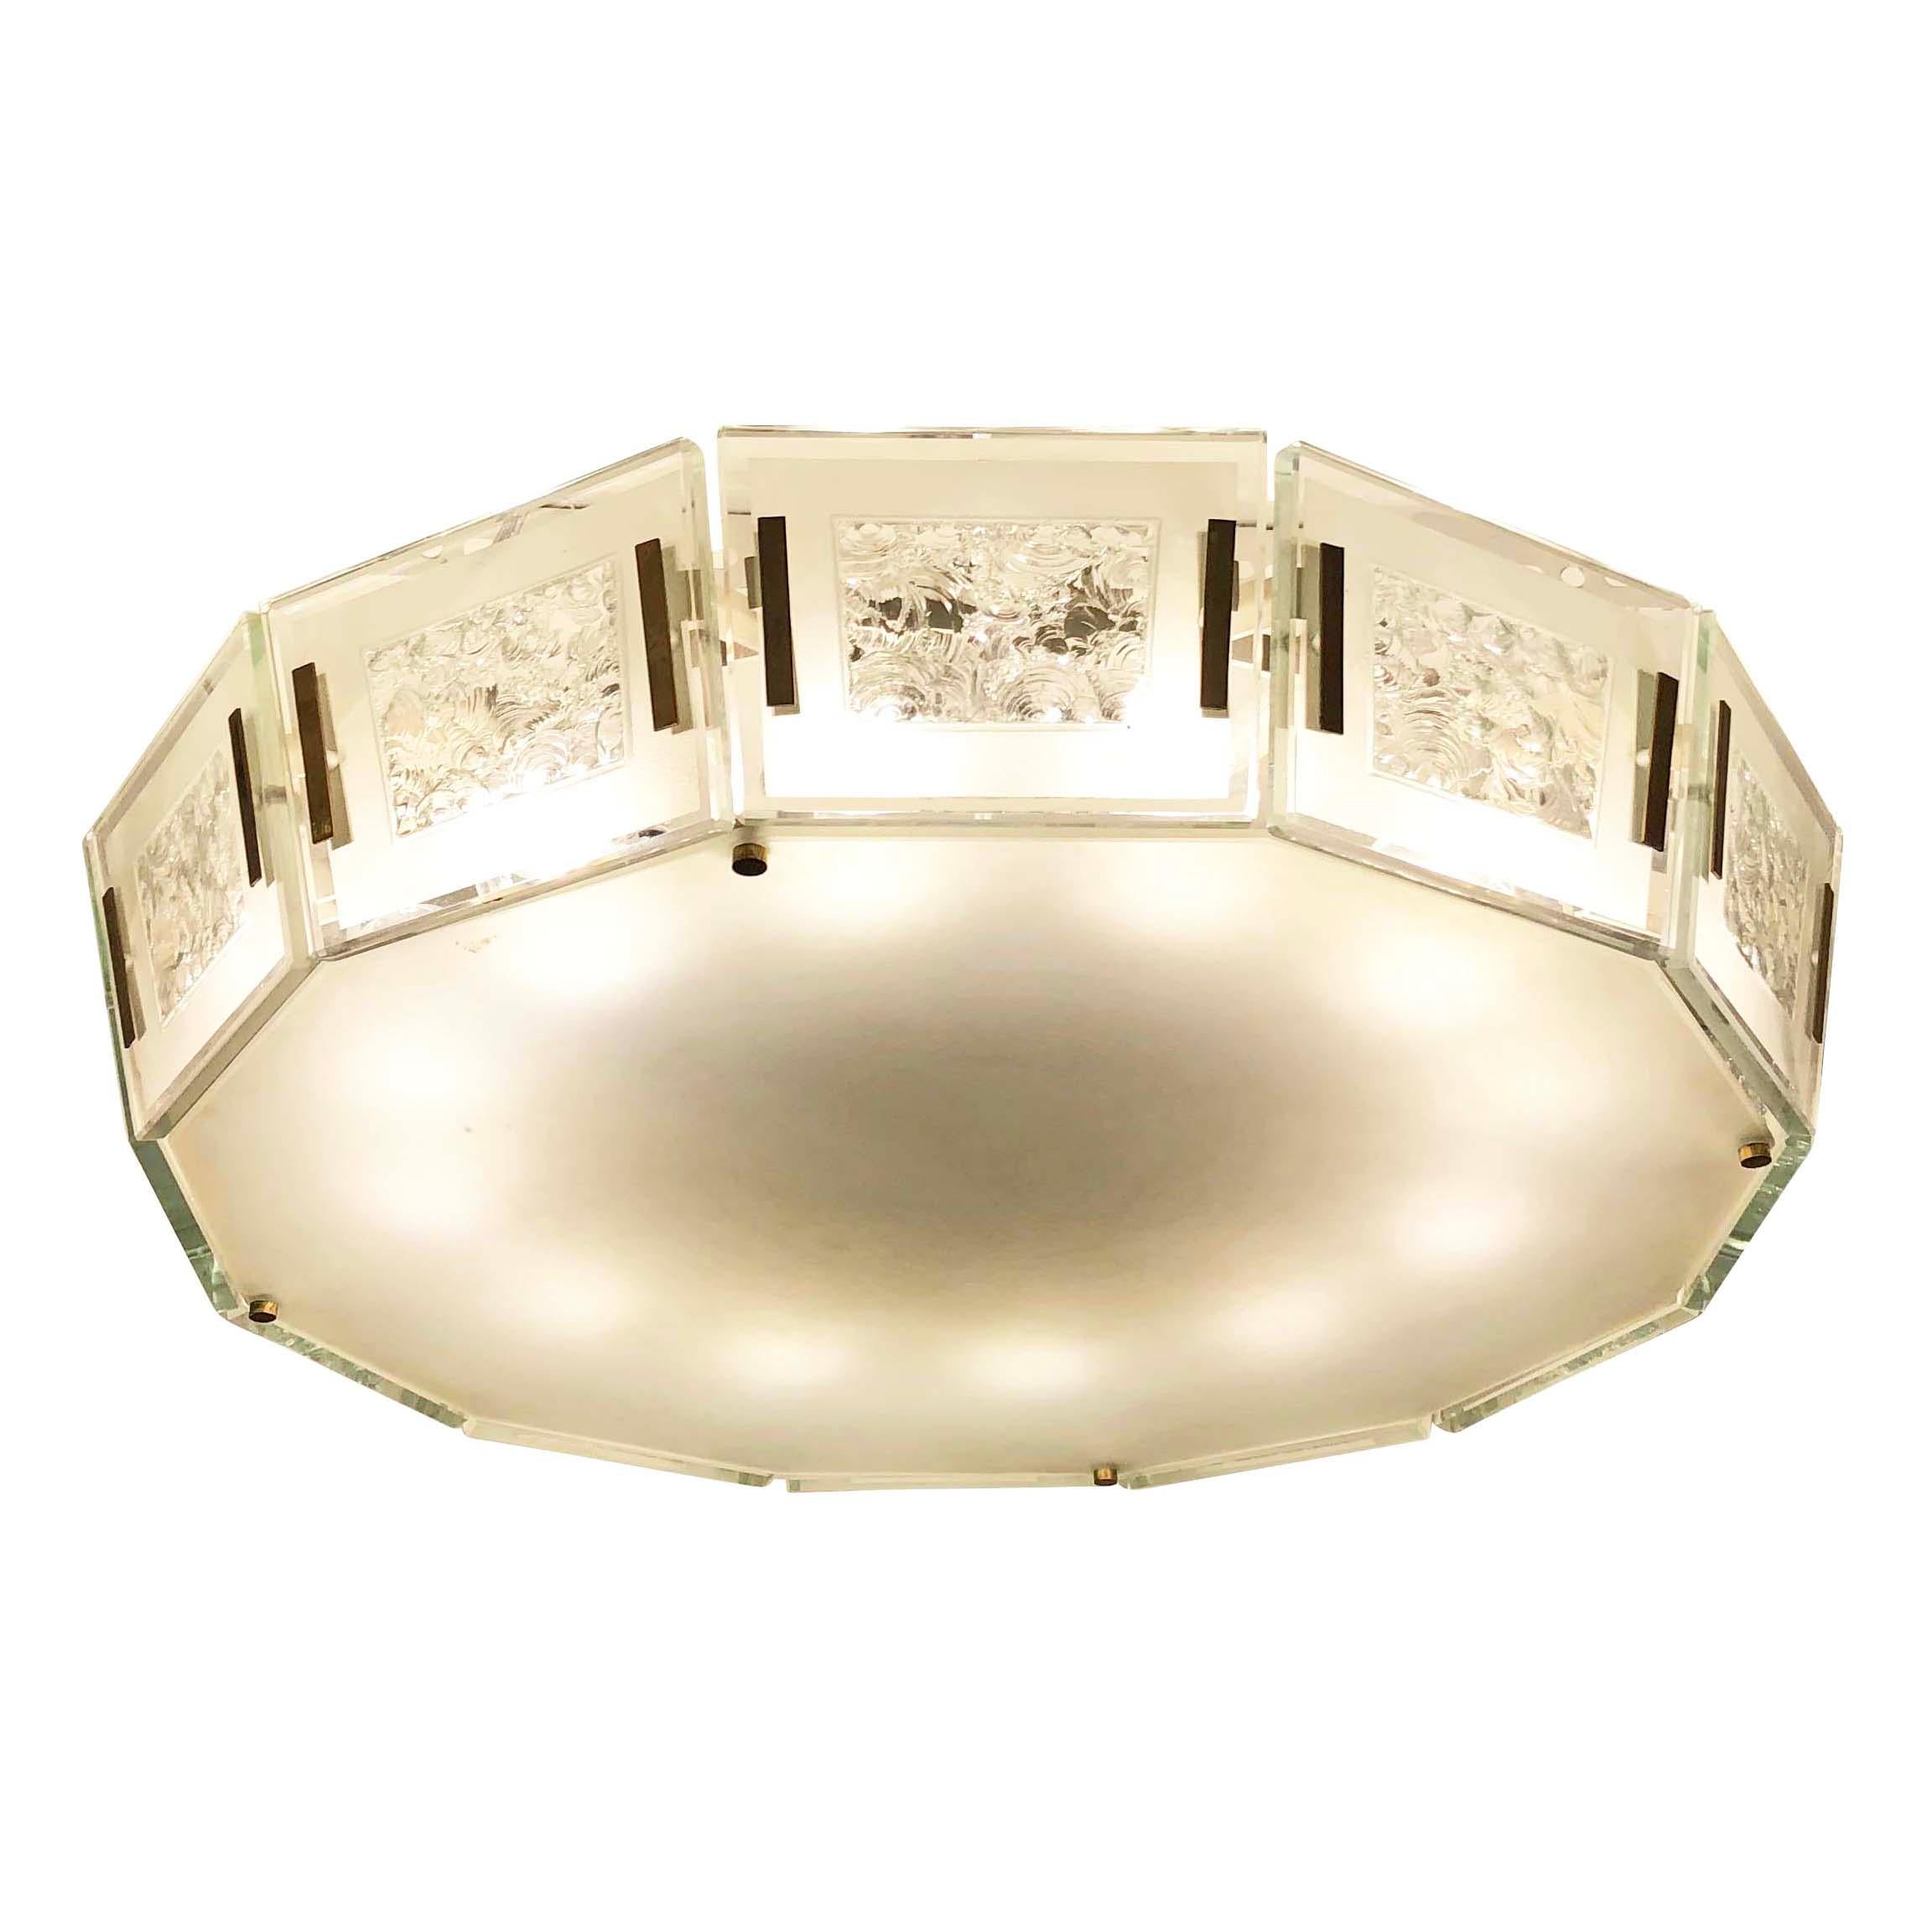 Fontana Arte ceiling light model 2270 designed by Max Ingrand in the 1960s. Composed of a flat twelve sided glass framed by glass panels with chiseled centres and brass fittings. All the glass is light blue/green as typical of Fontana Arte pieces.